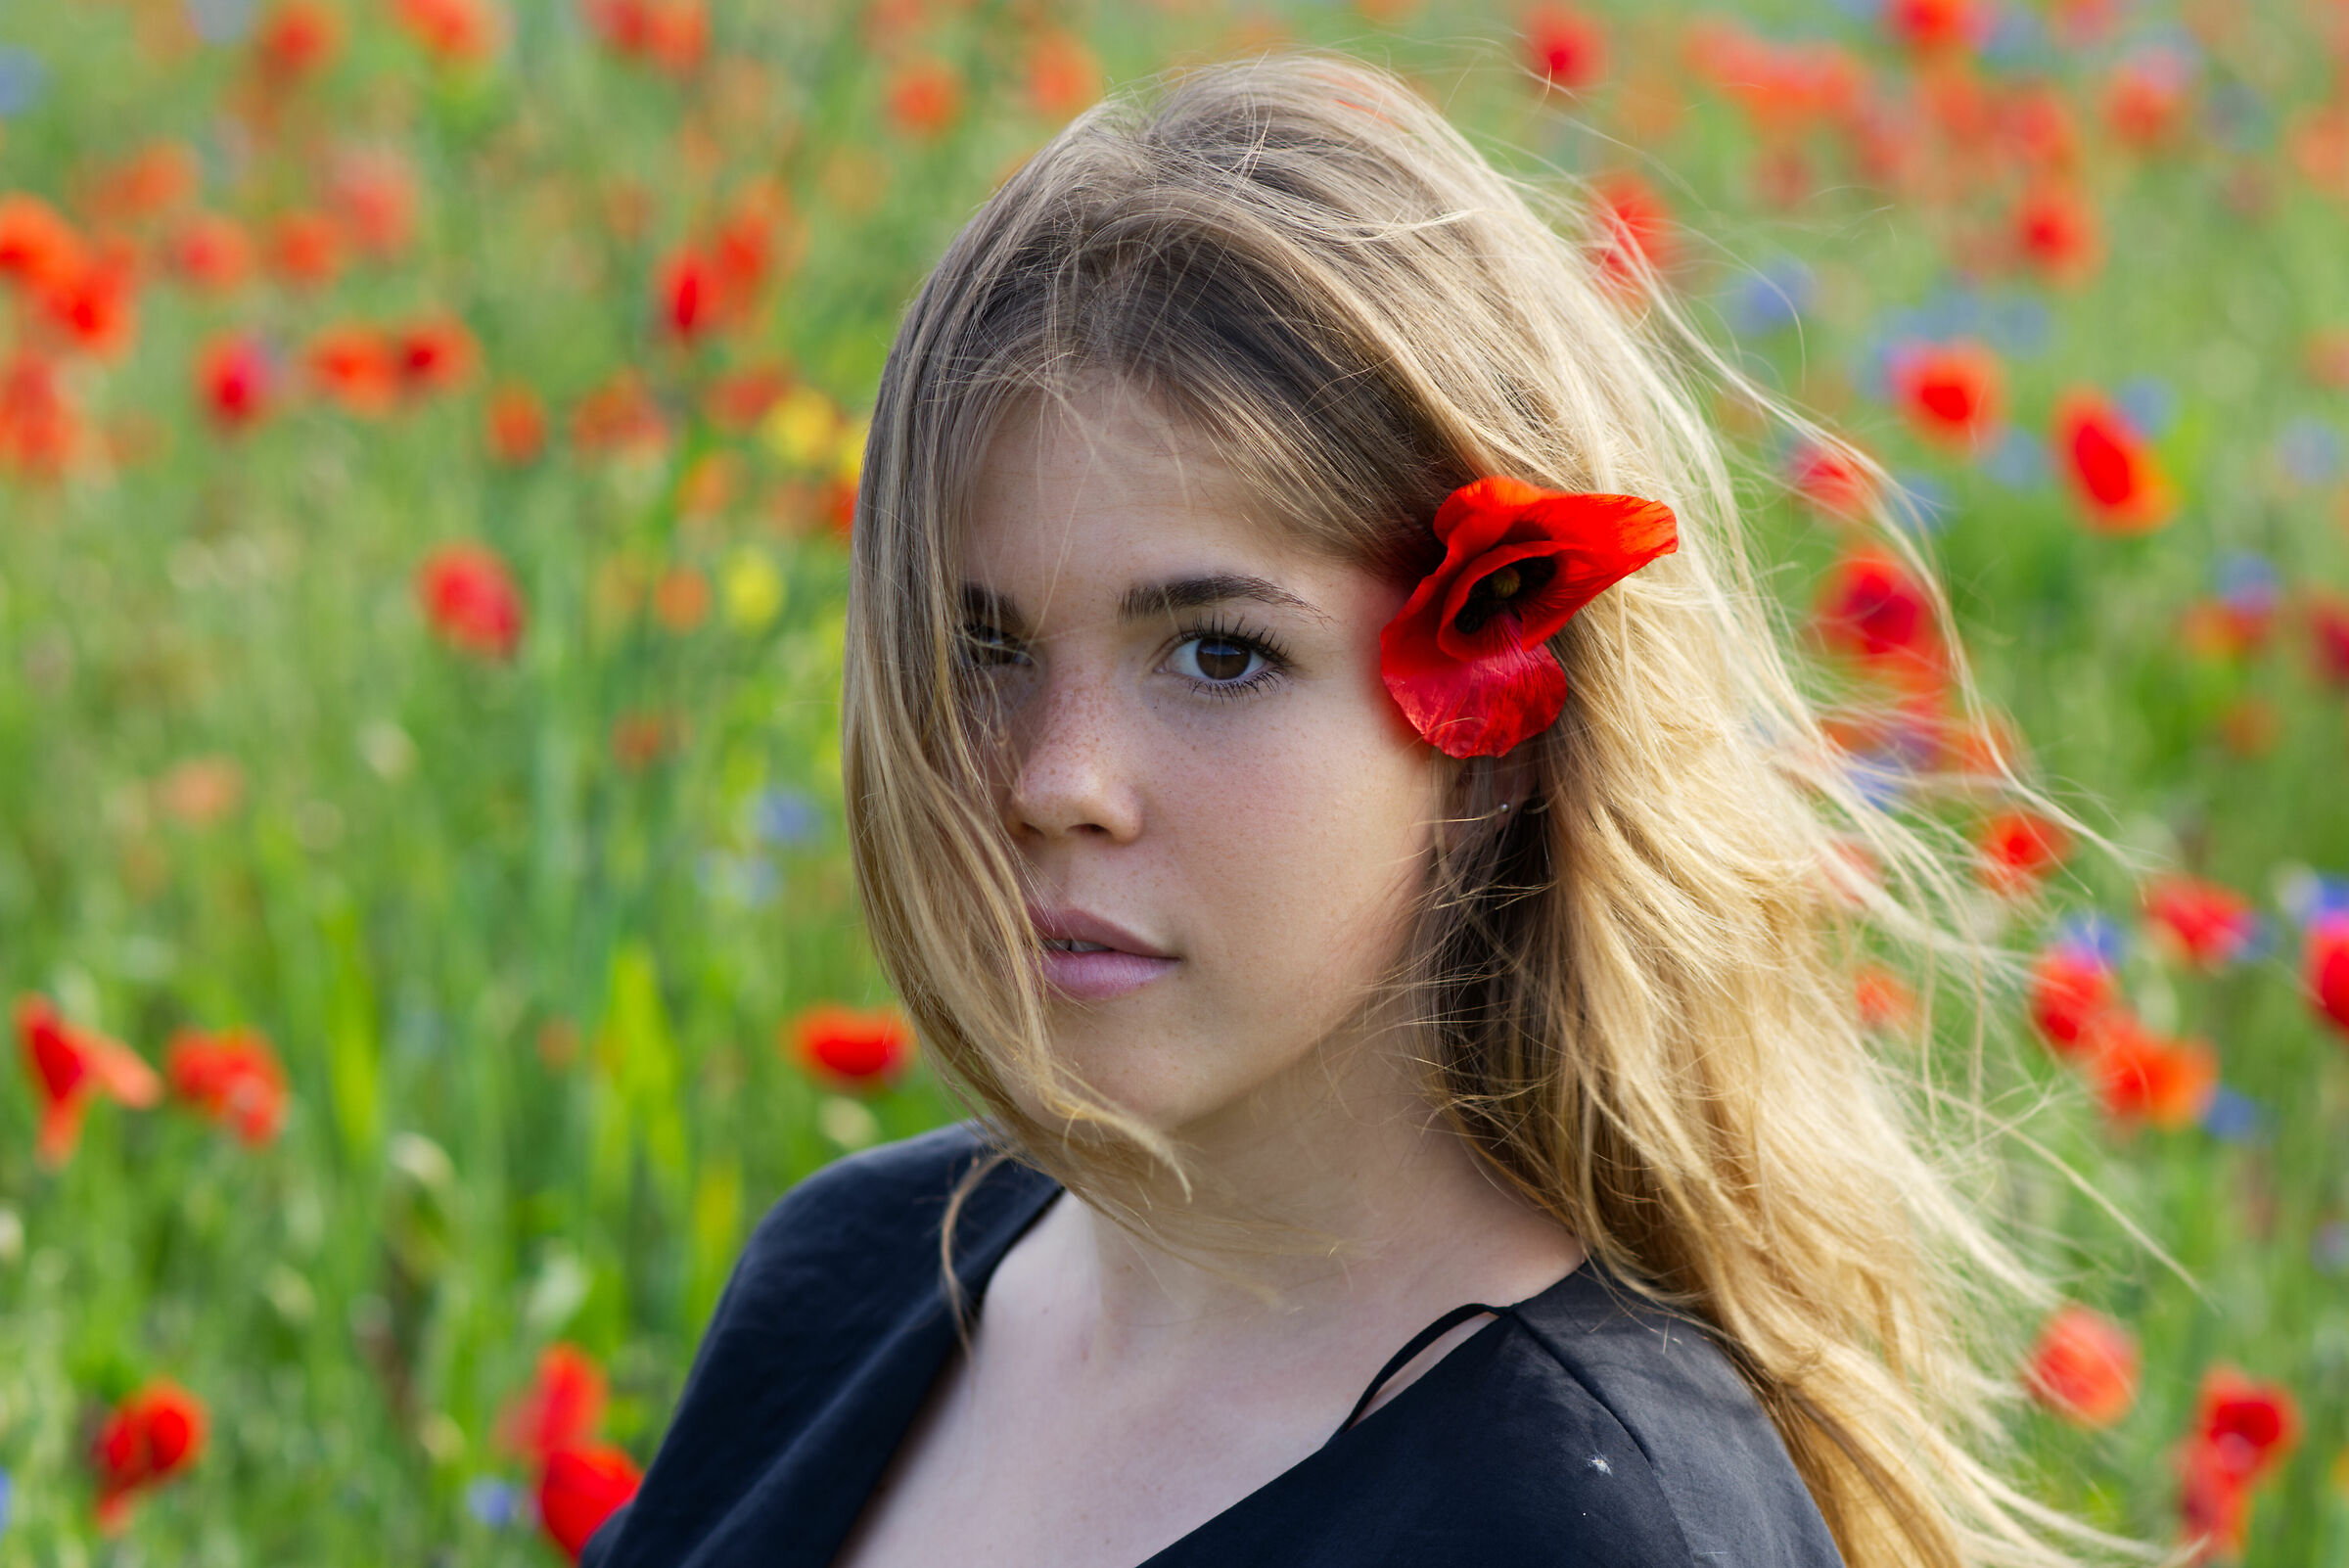 Ludi in the poppies (2/2)...